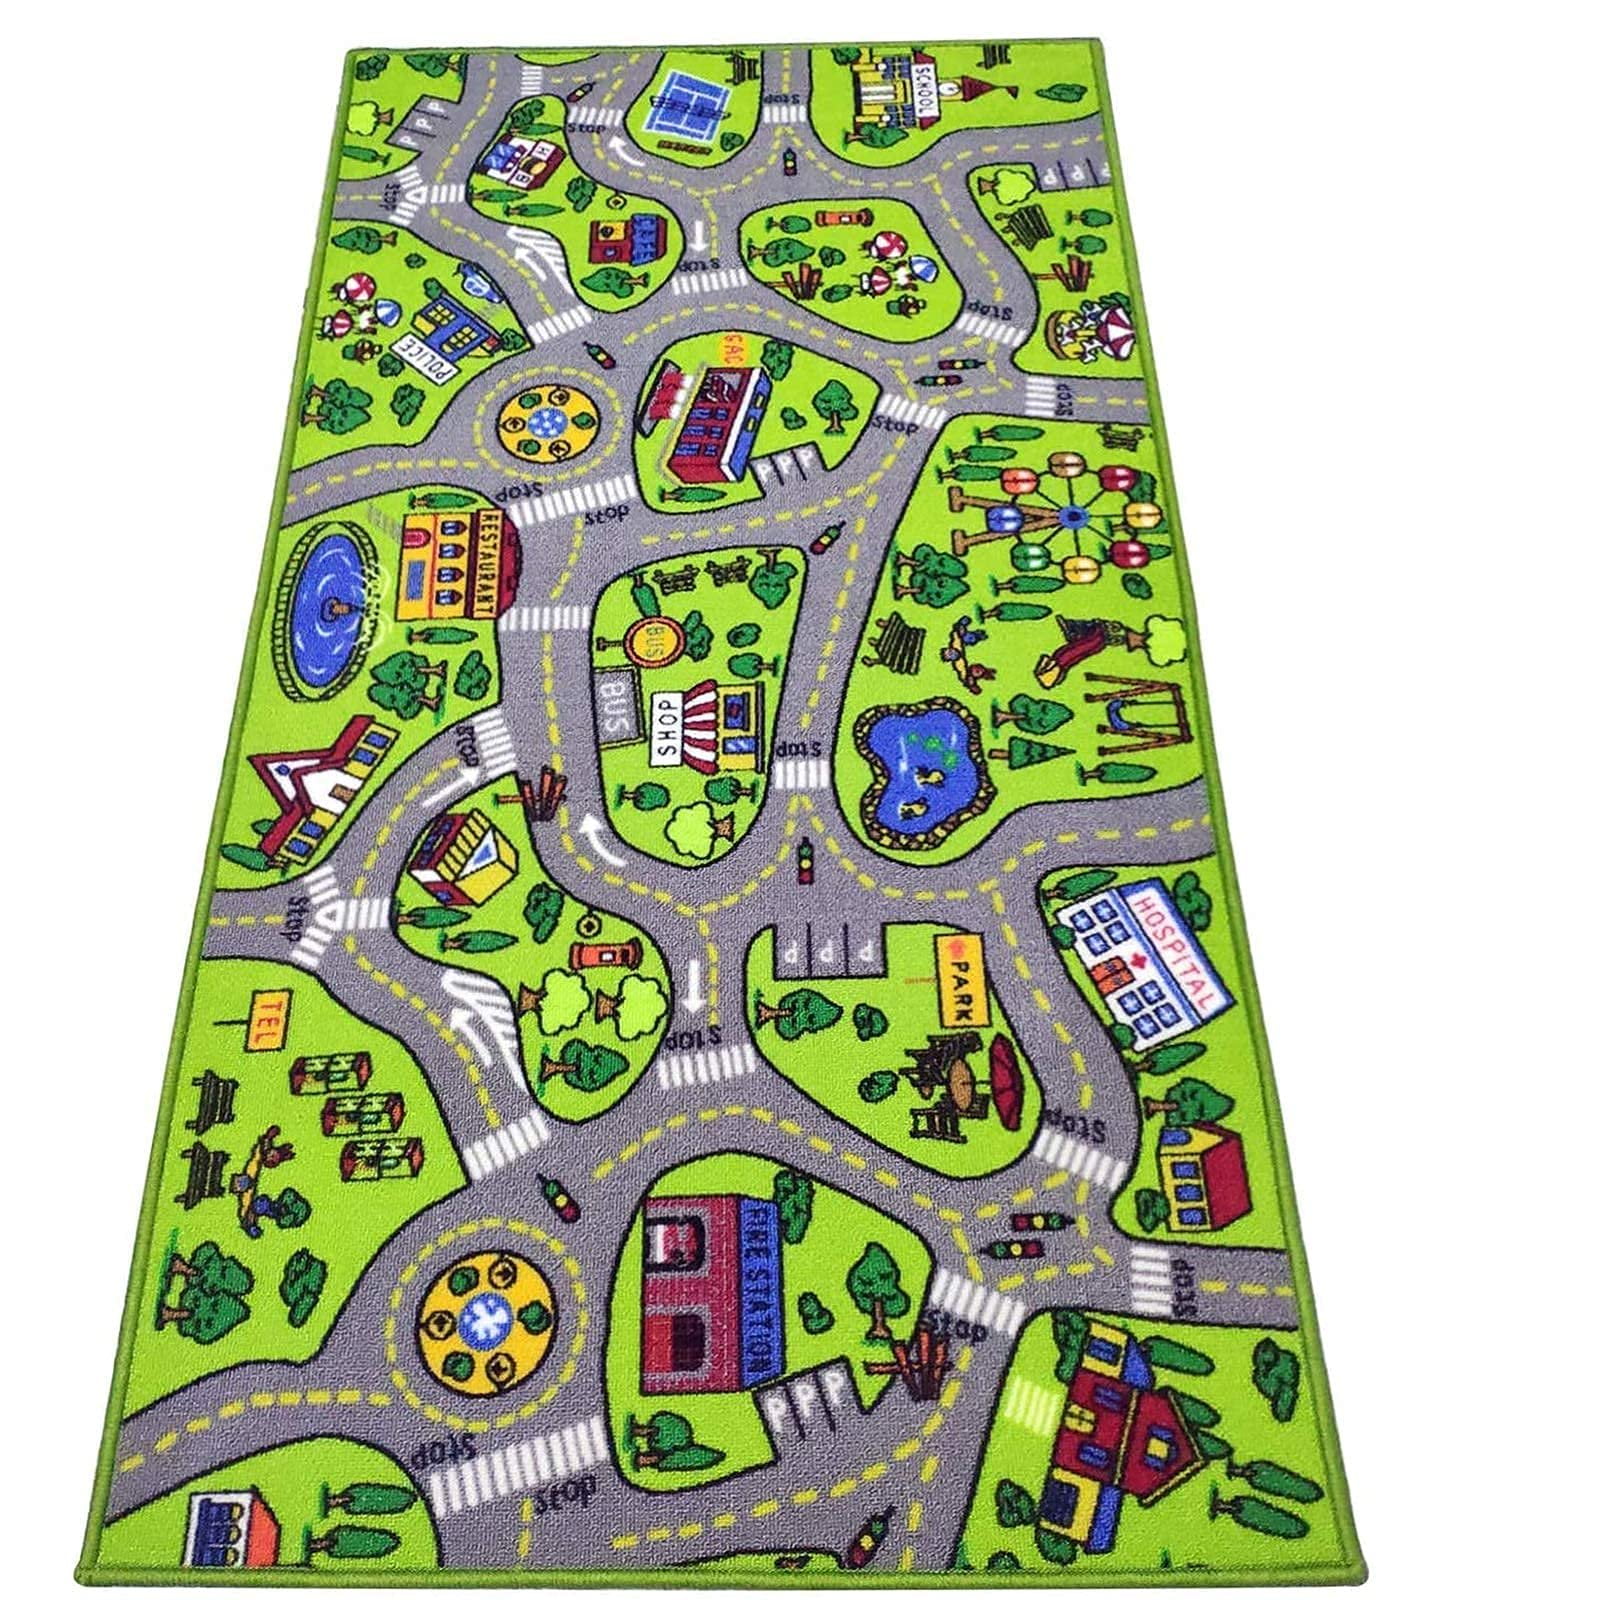 Travelwant Baby Play Mat Extra Thick, Large, Nordic Leaf Rug